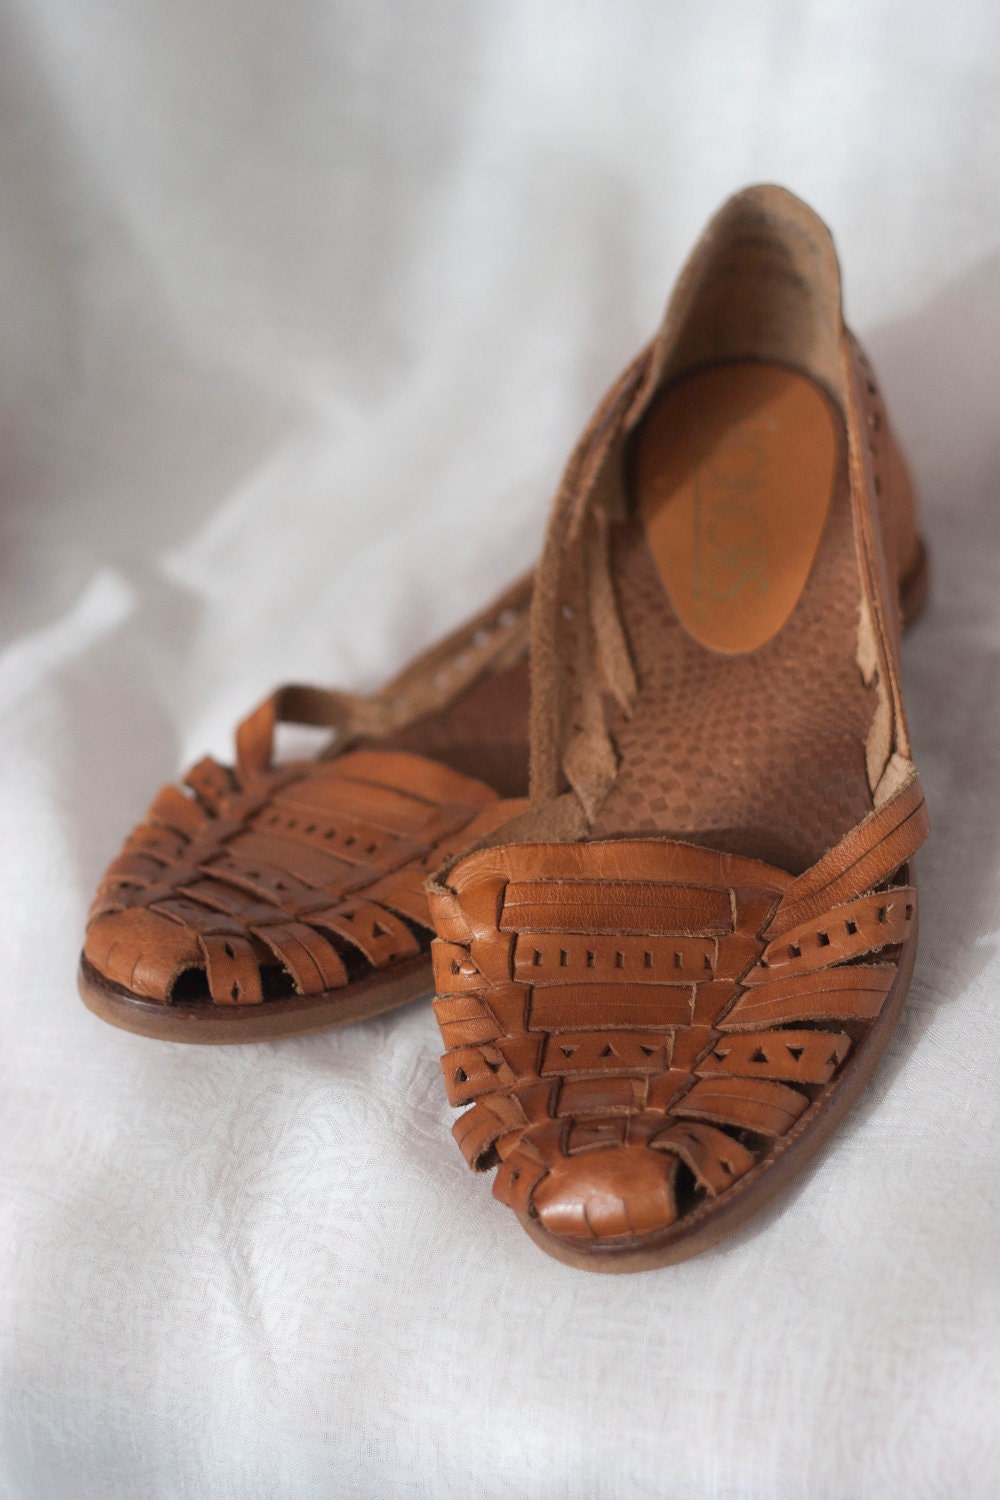 Huarache Sandals Brown Leather 7.5 Womens | Etsy